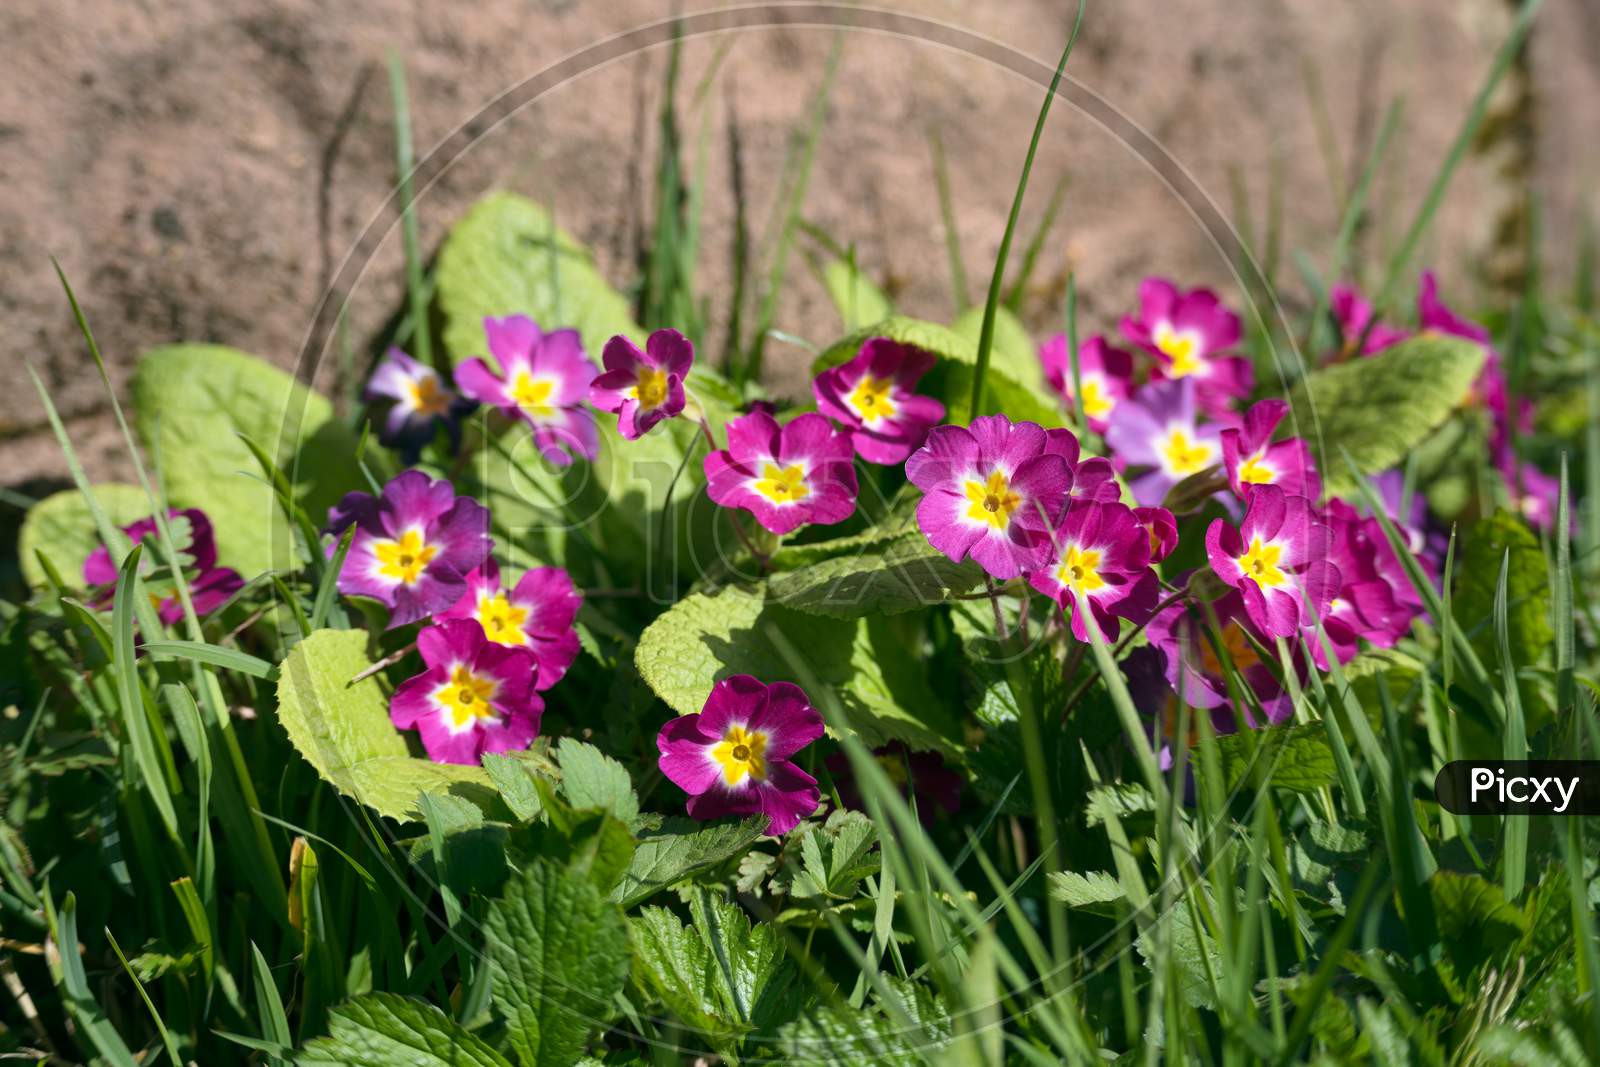 A Group Of Pink Primroses Flowering In The Spring Sunshine